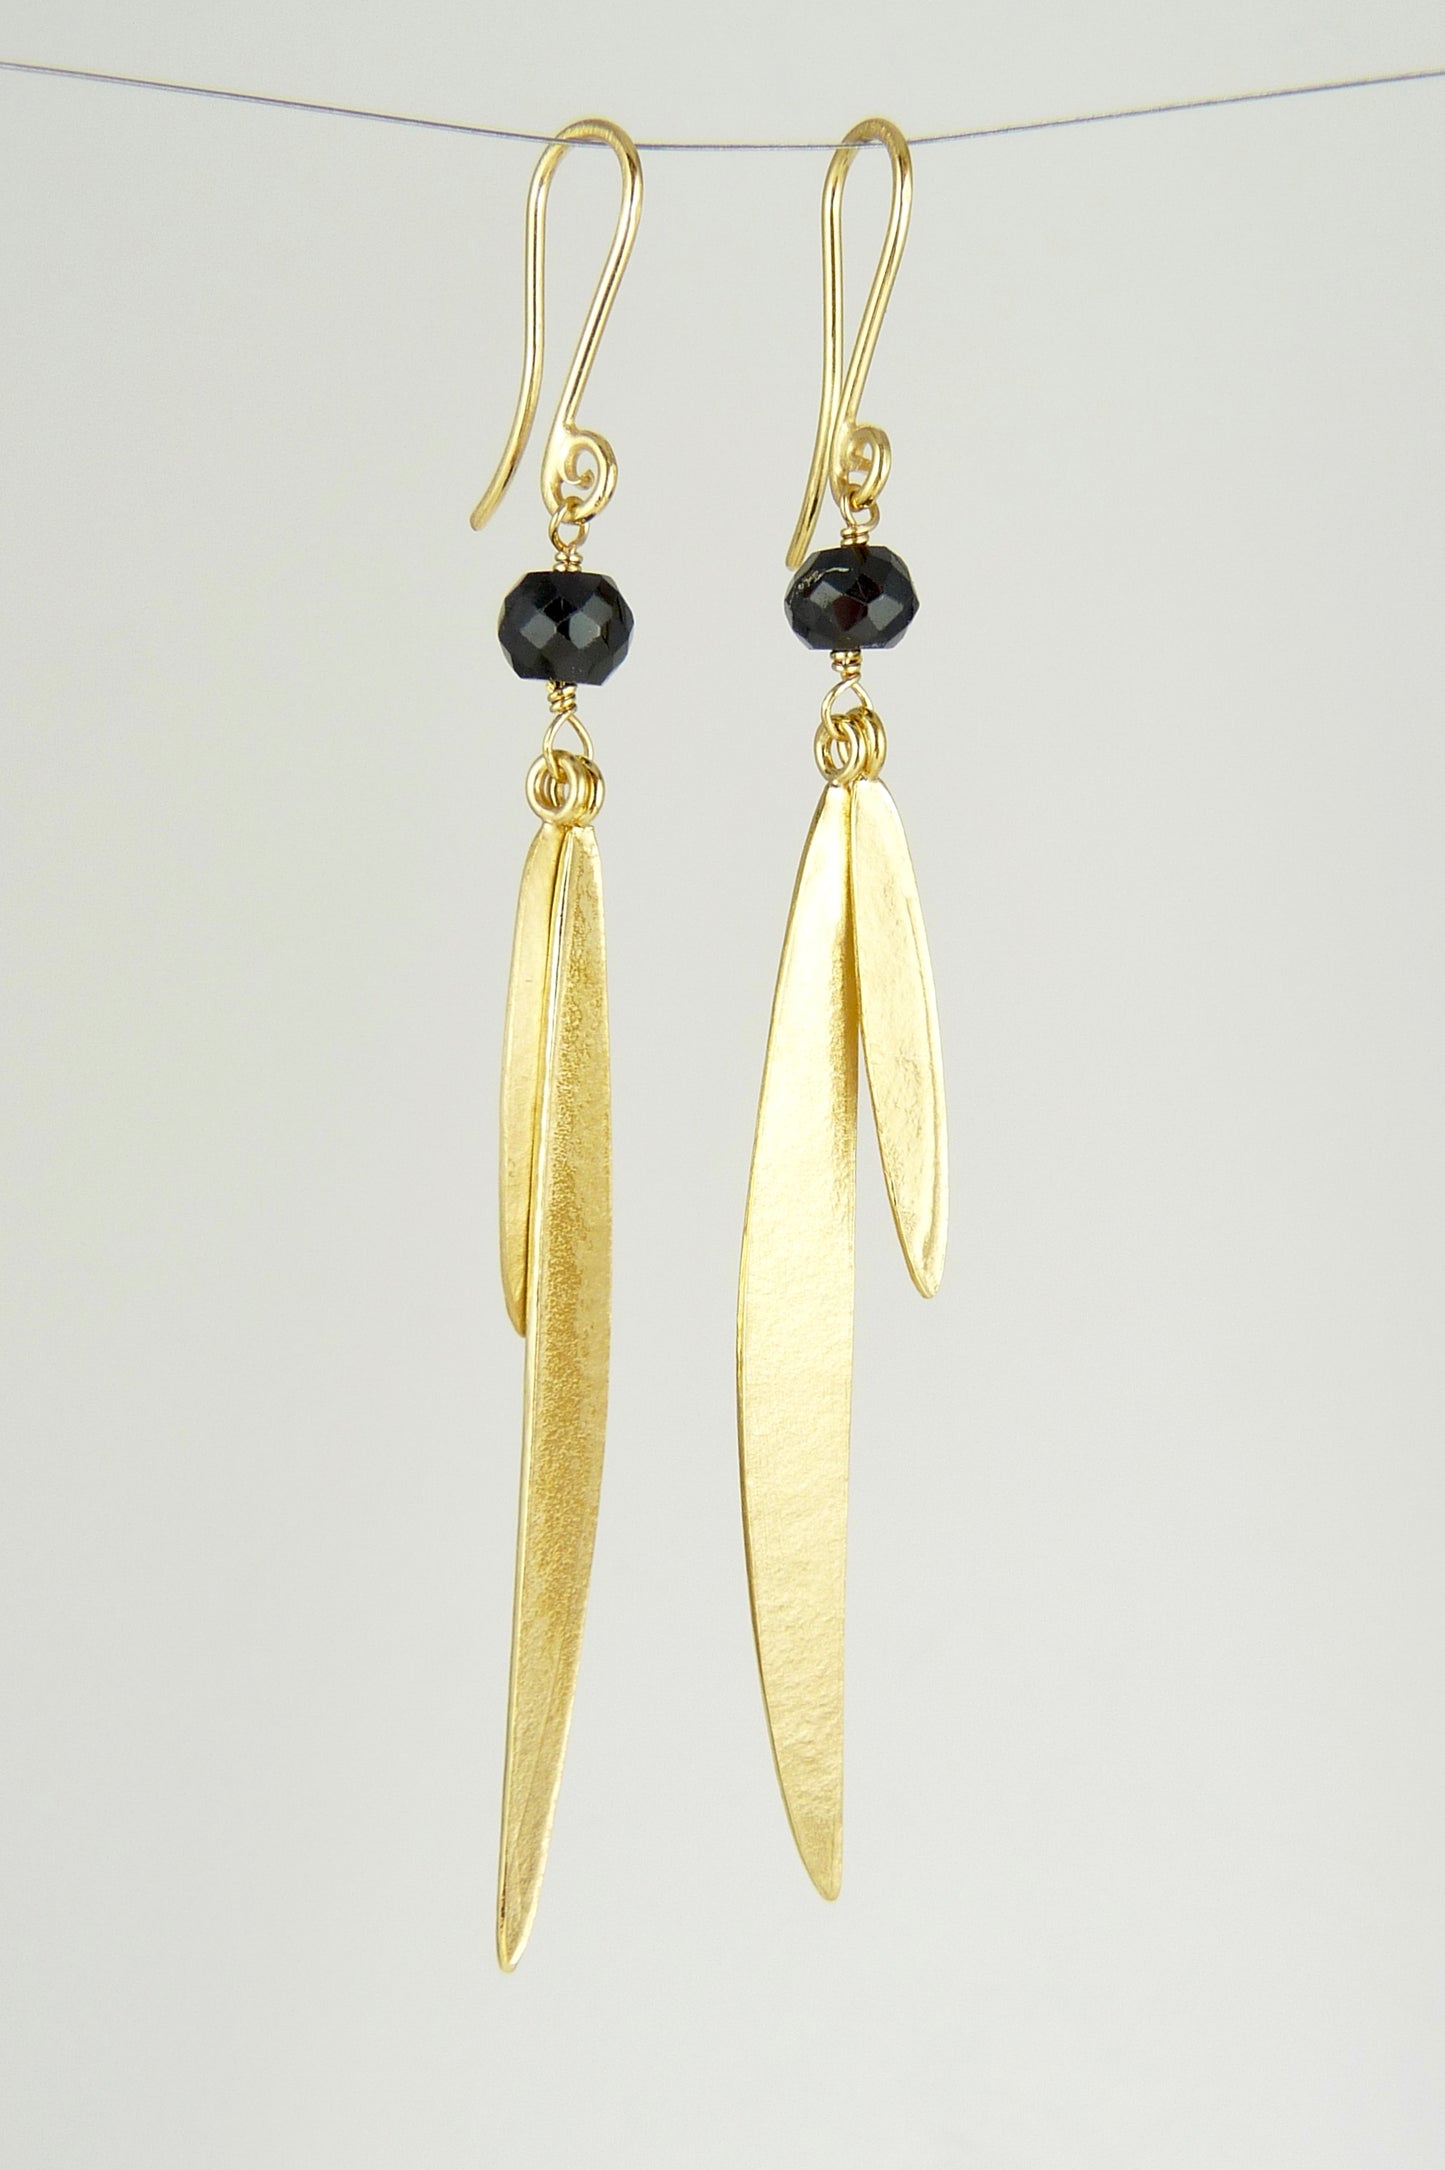 Lily Long Double Leaf Earrings with Black Spinel